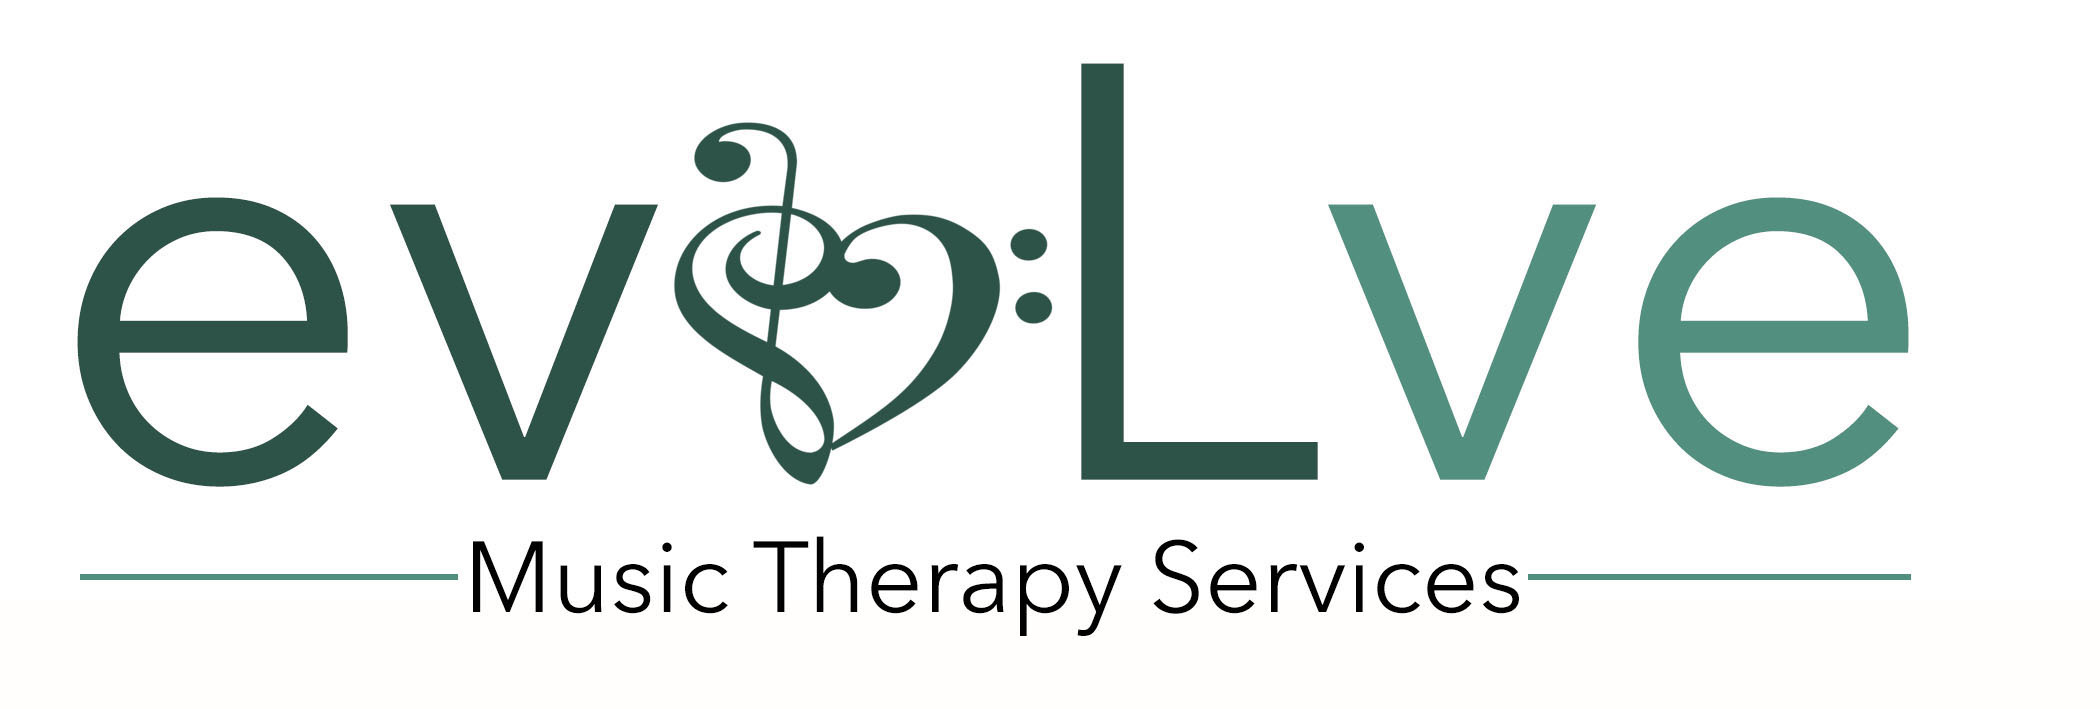 Evolve Music Therapy Services